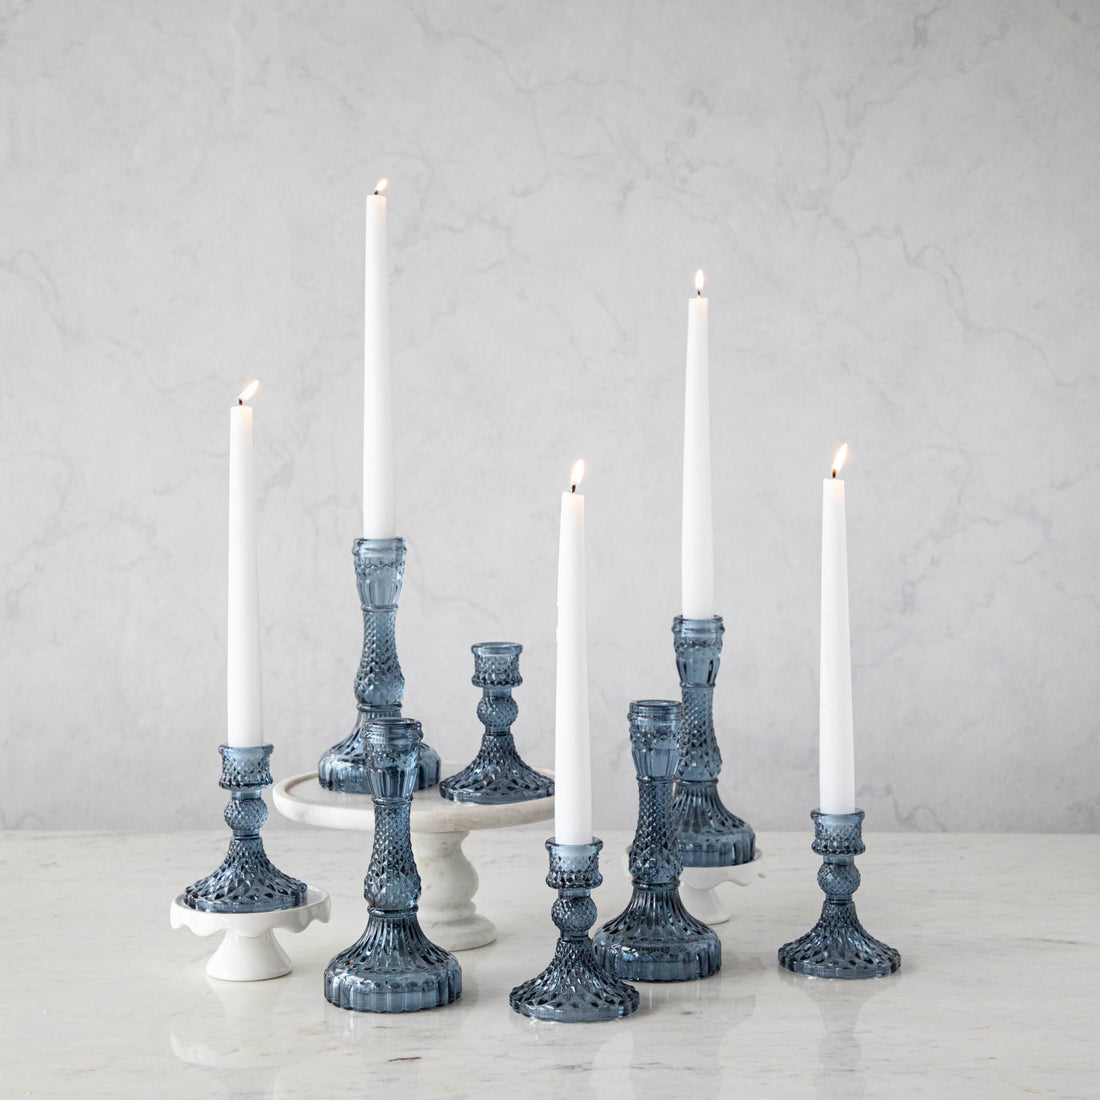 A group of Accent Decor Vintage Blue Candlestick candle holders on a marble table.